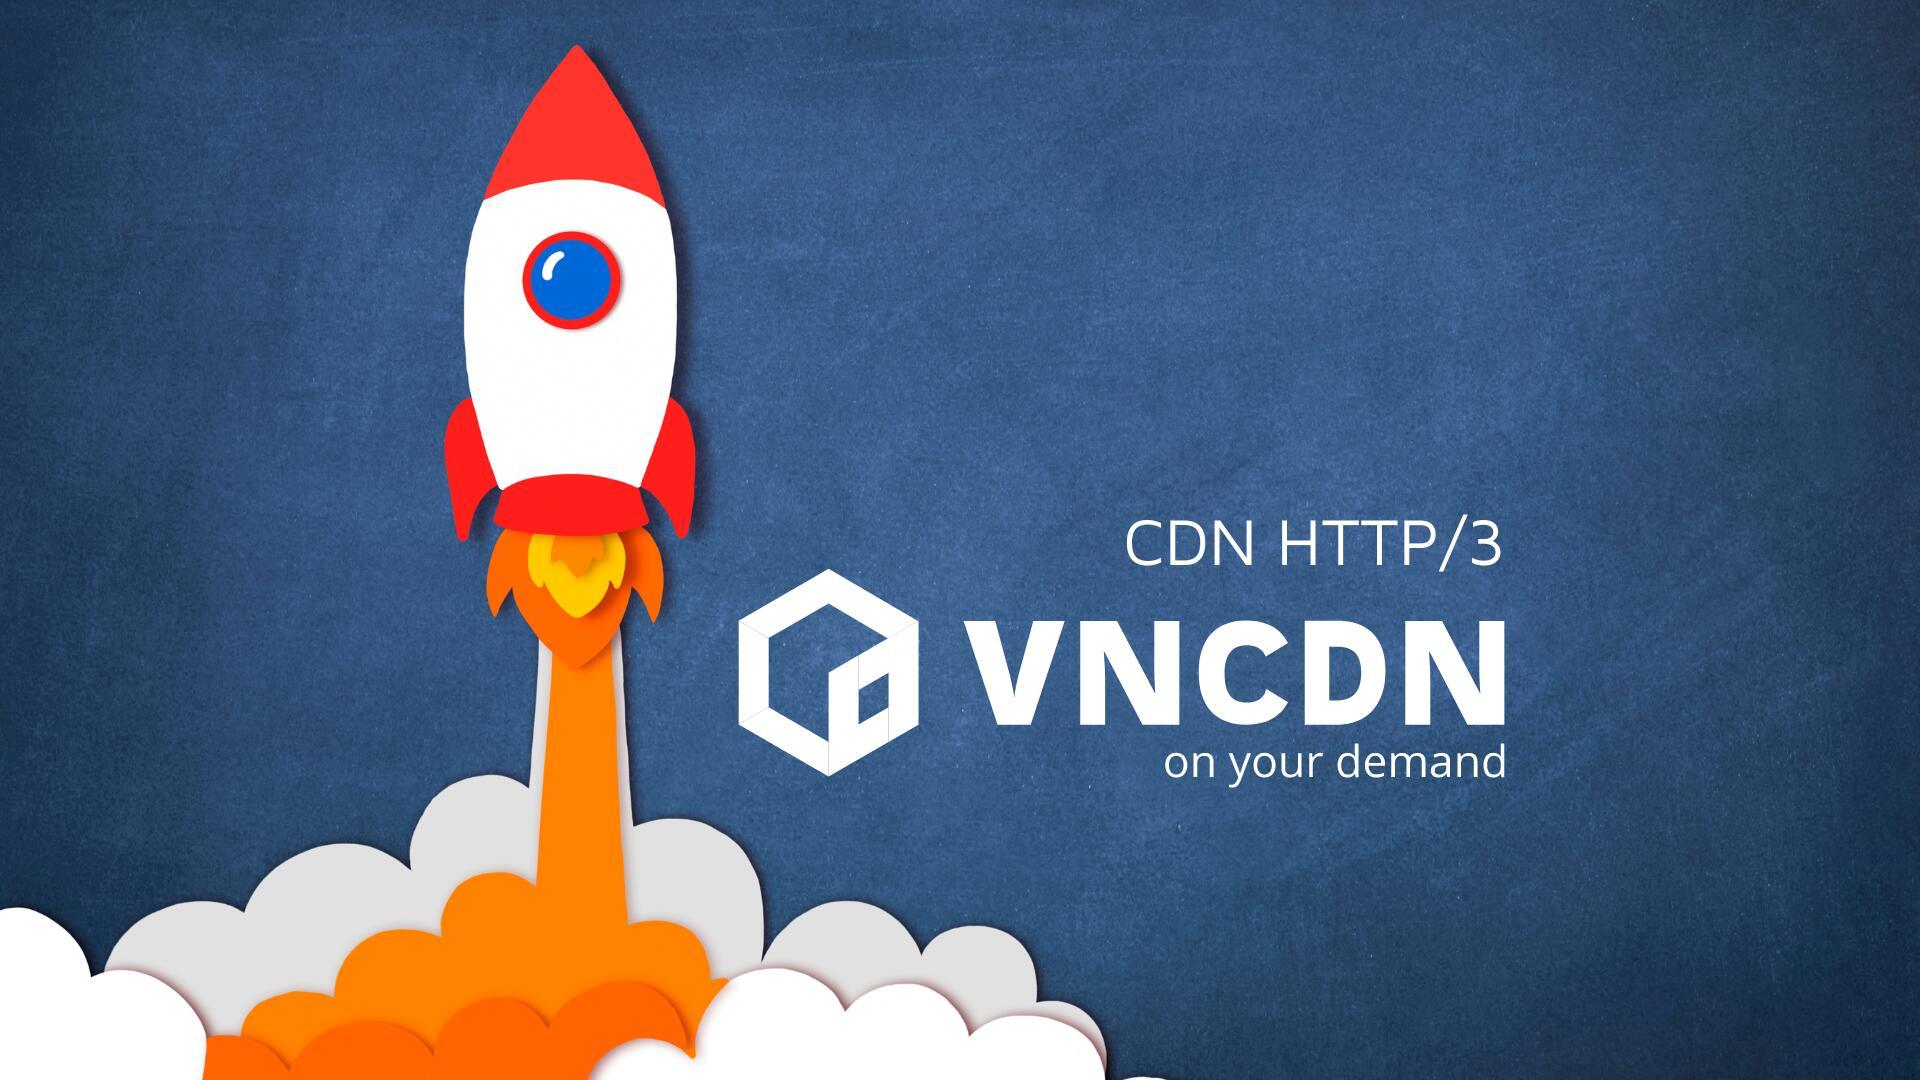 VNETWORK CDN supports data transmission with HTTP/3 